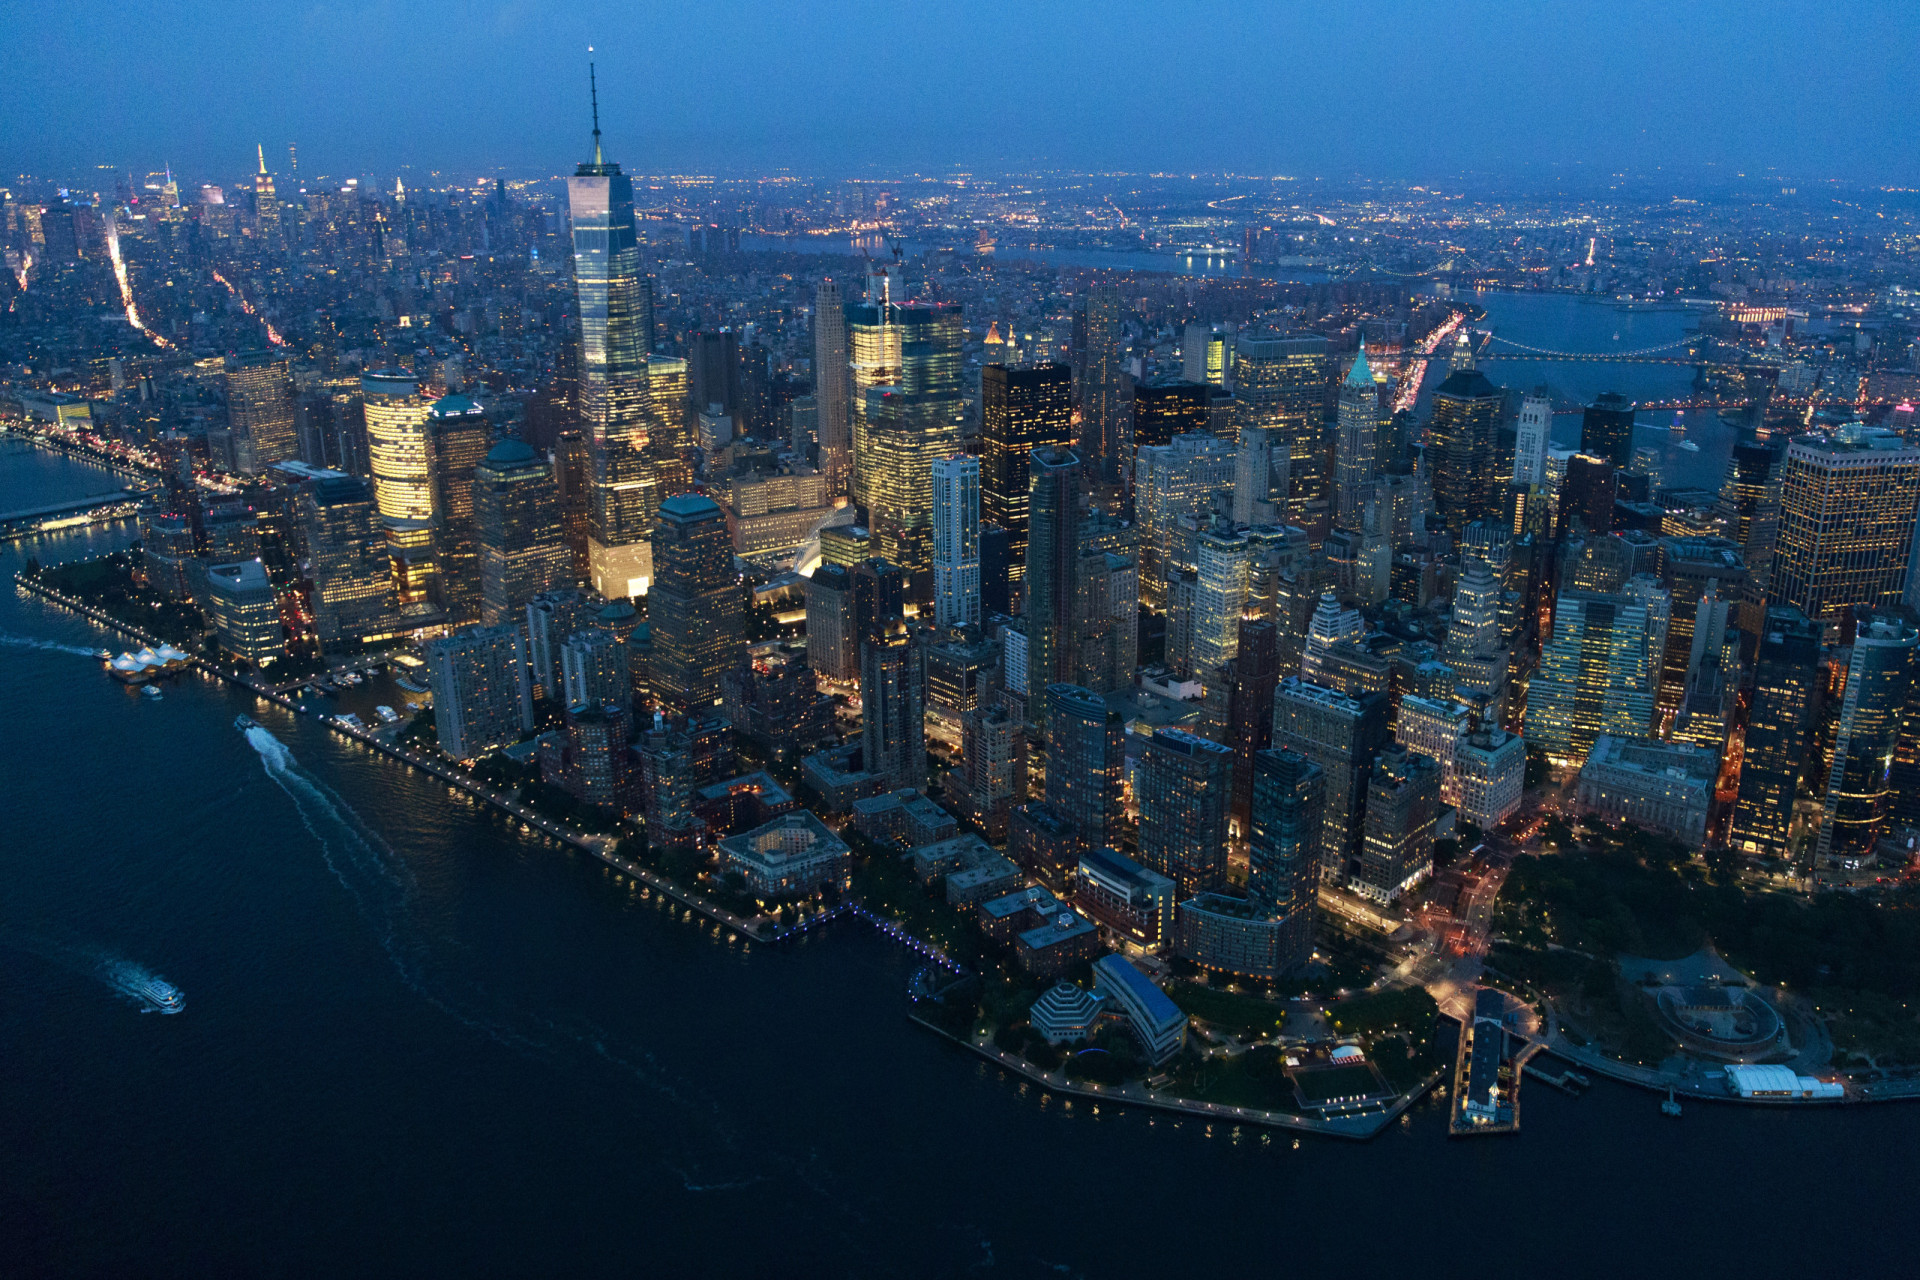 <p>New York has often been described as the cultural capital of the world, a place where theater, architecture, art, and fashion blend together in a dizzying mixture. It’s no wonder that this metropolis is ranked fifth on this list.</p><p>You may also like:<a href="https://www.starsinsider.com/n/452409?utm_source=msn.com&utm_medium=display&utm_campaign=referral_description&utm_content=700885en-us"> Interesting facts you didn't know about Joe Biden</a></p>